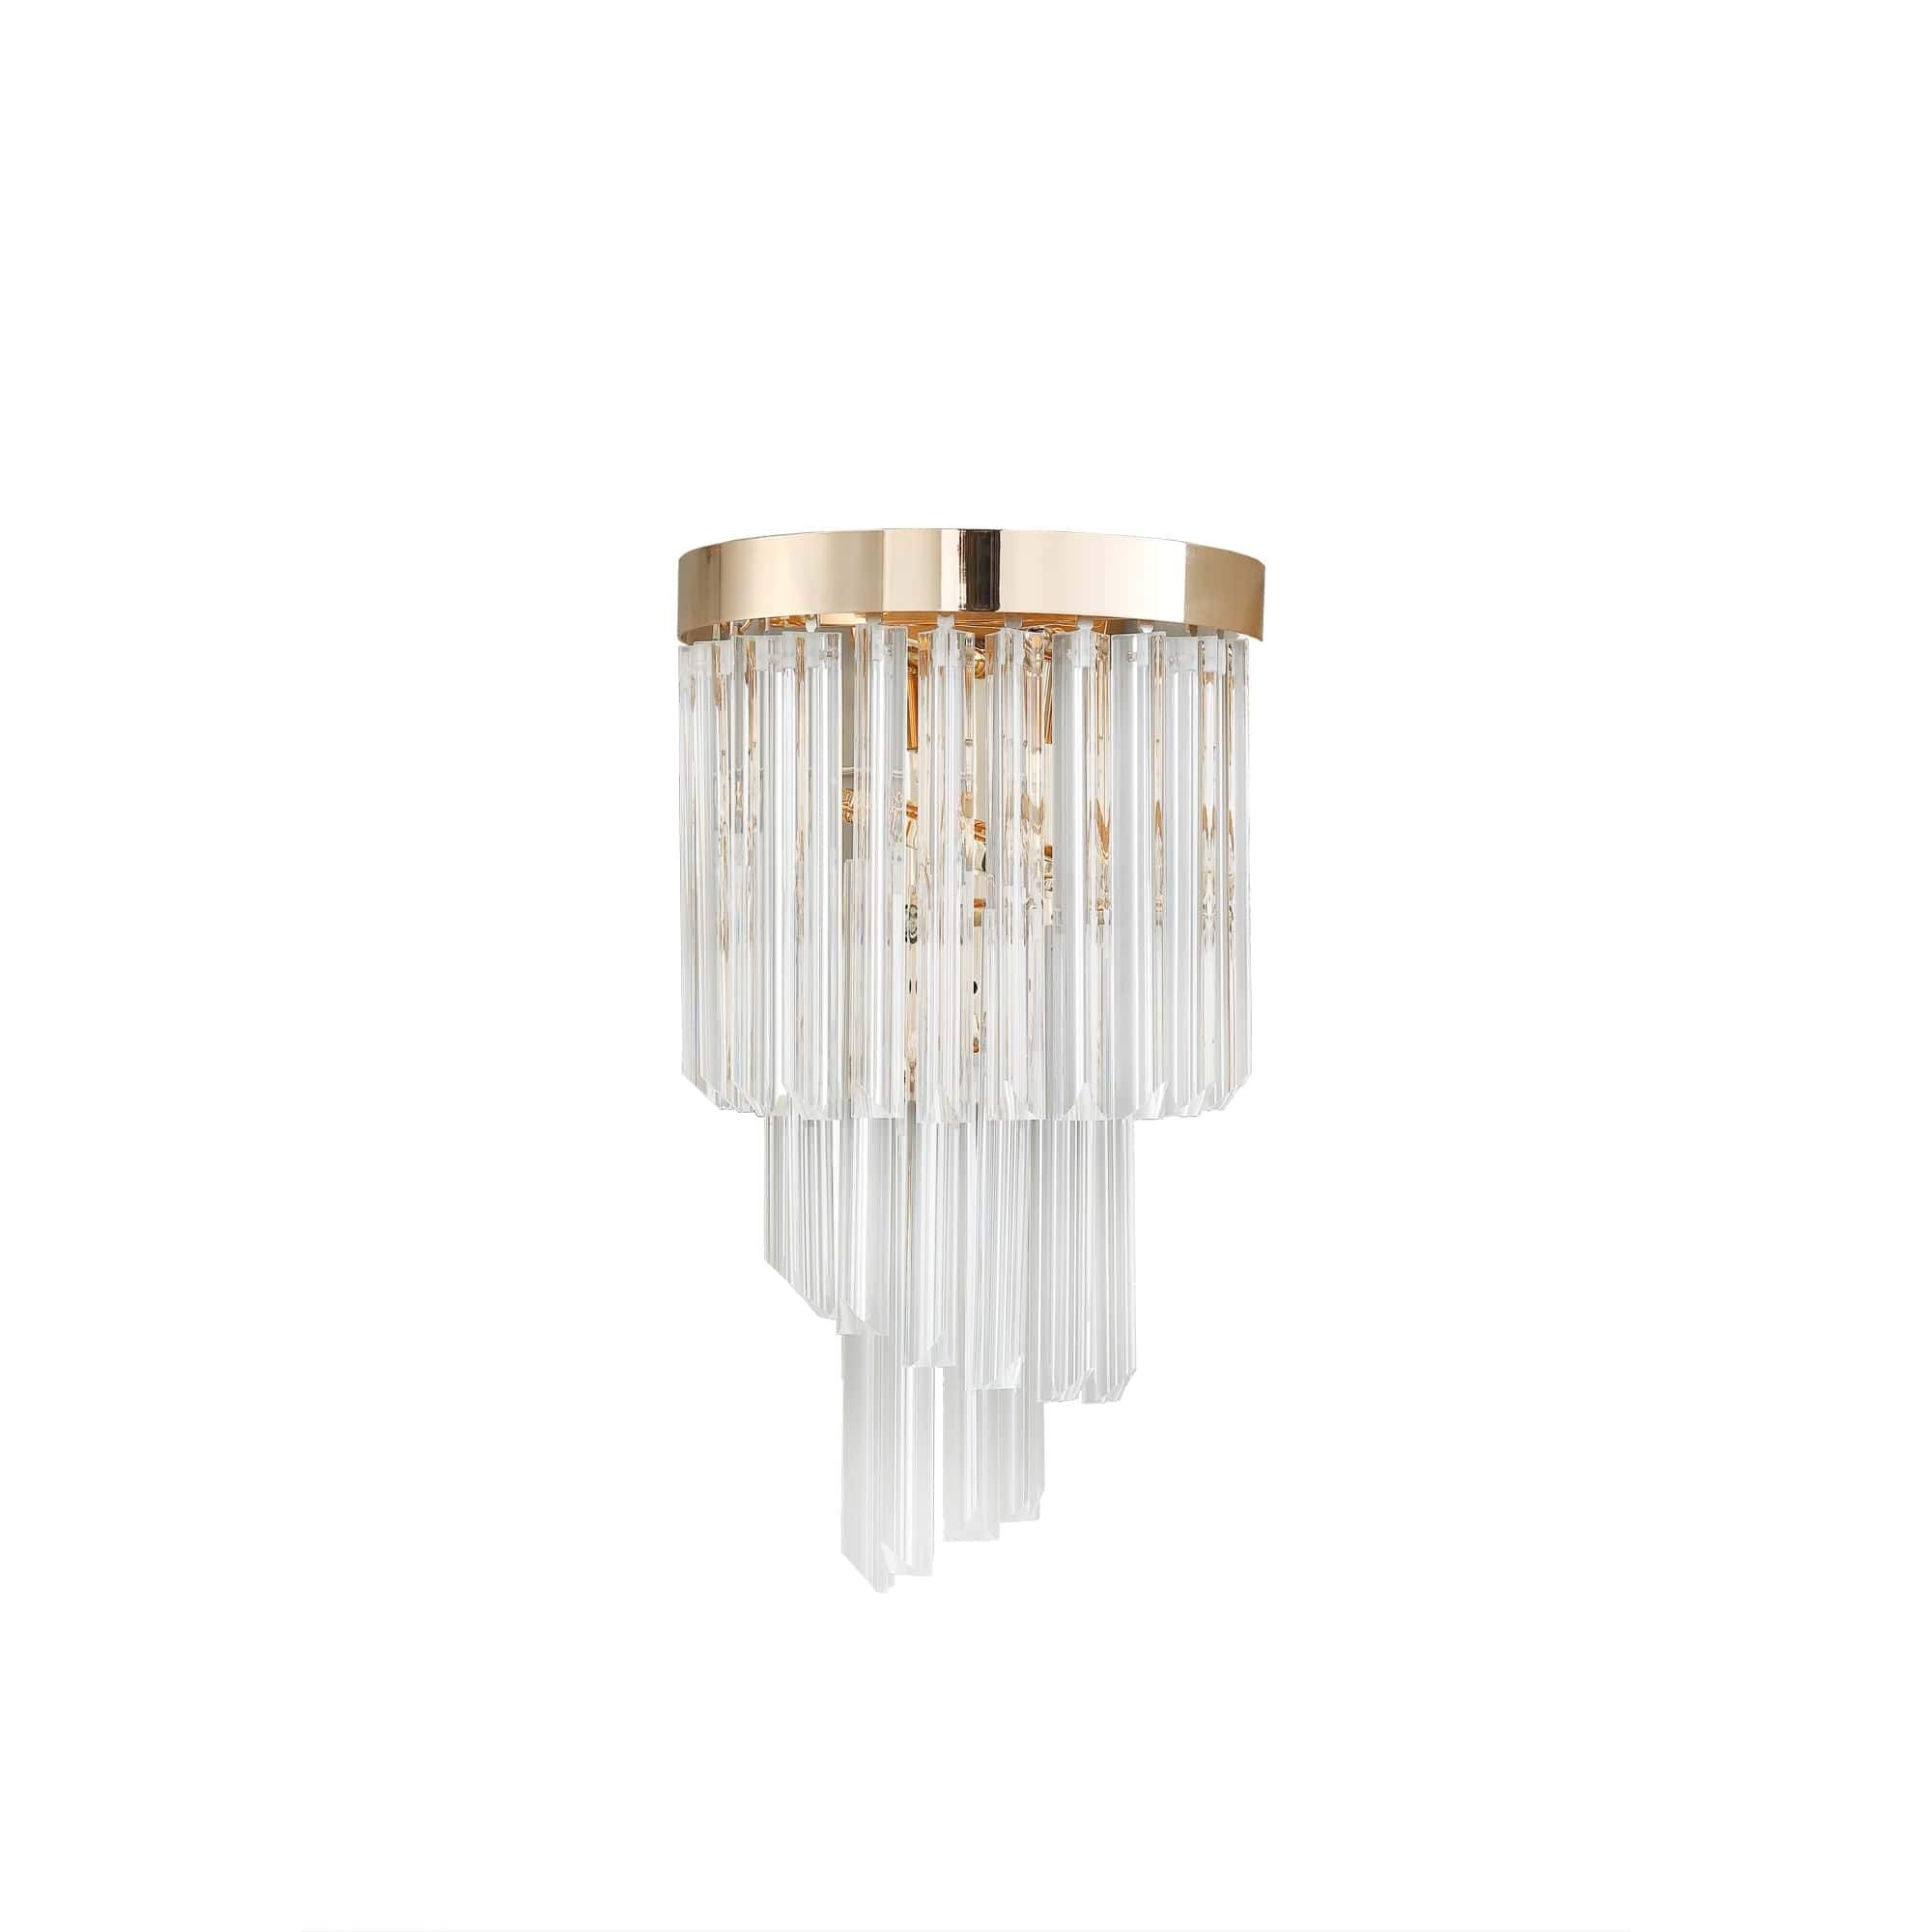 Twin Palms Crystal Sconce - Italian Concept